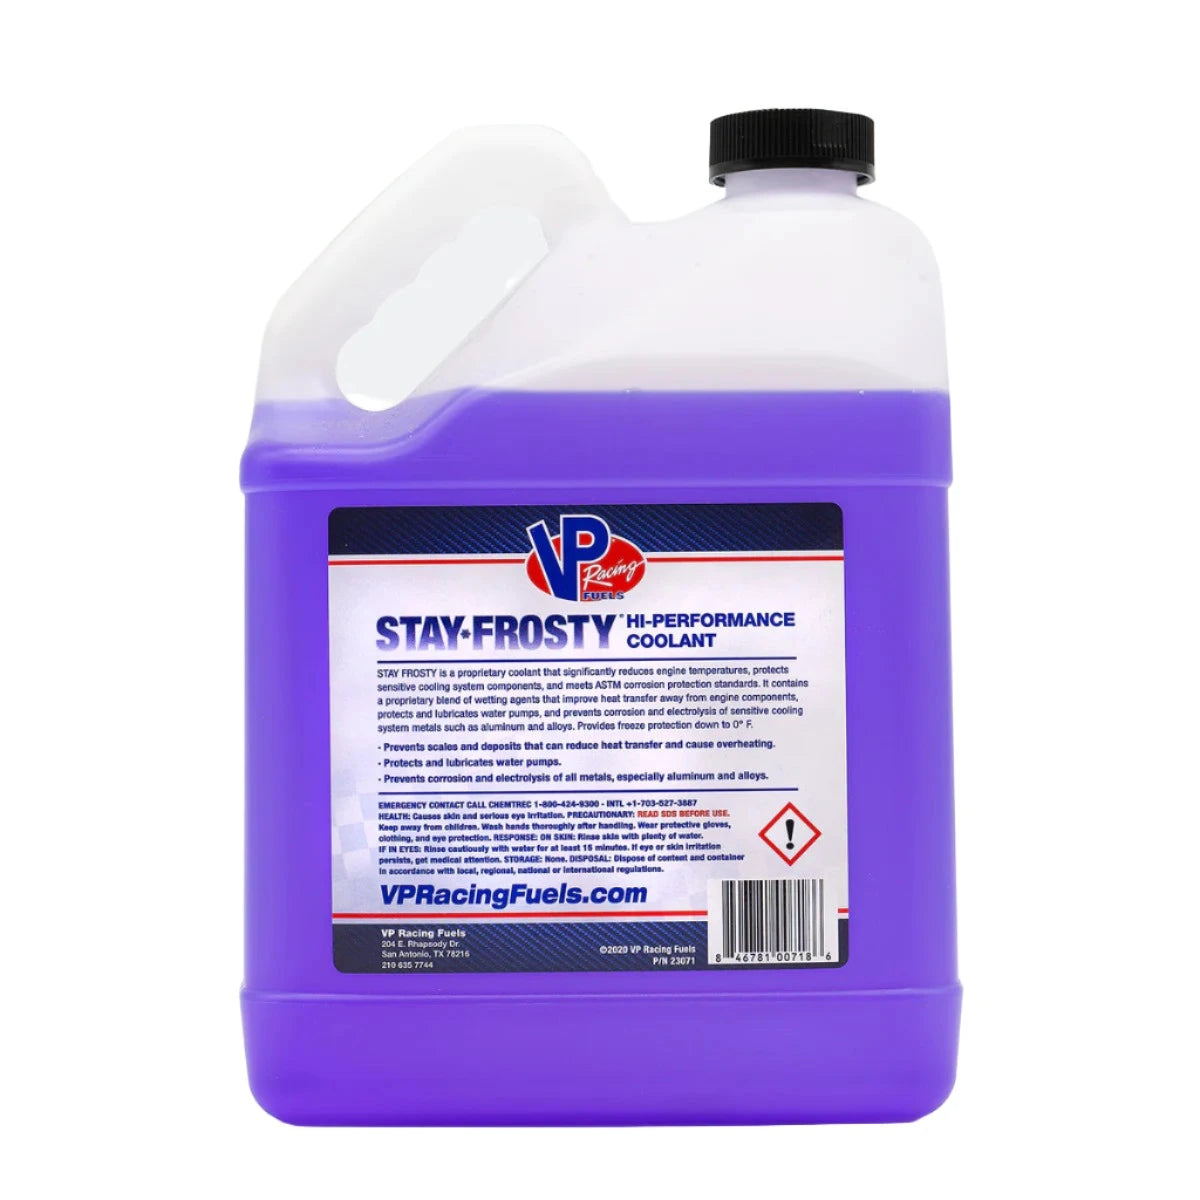 STAY FROSTY - HI PERFORMANCE COOLANT